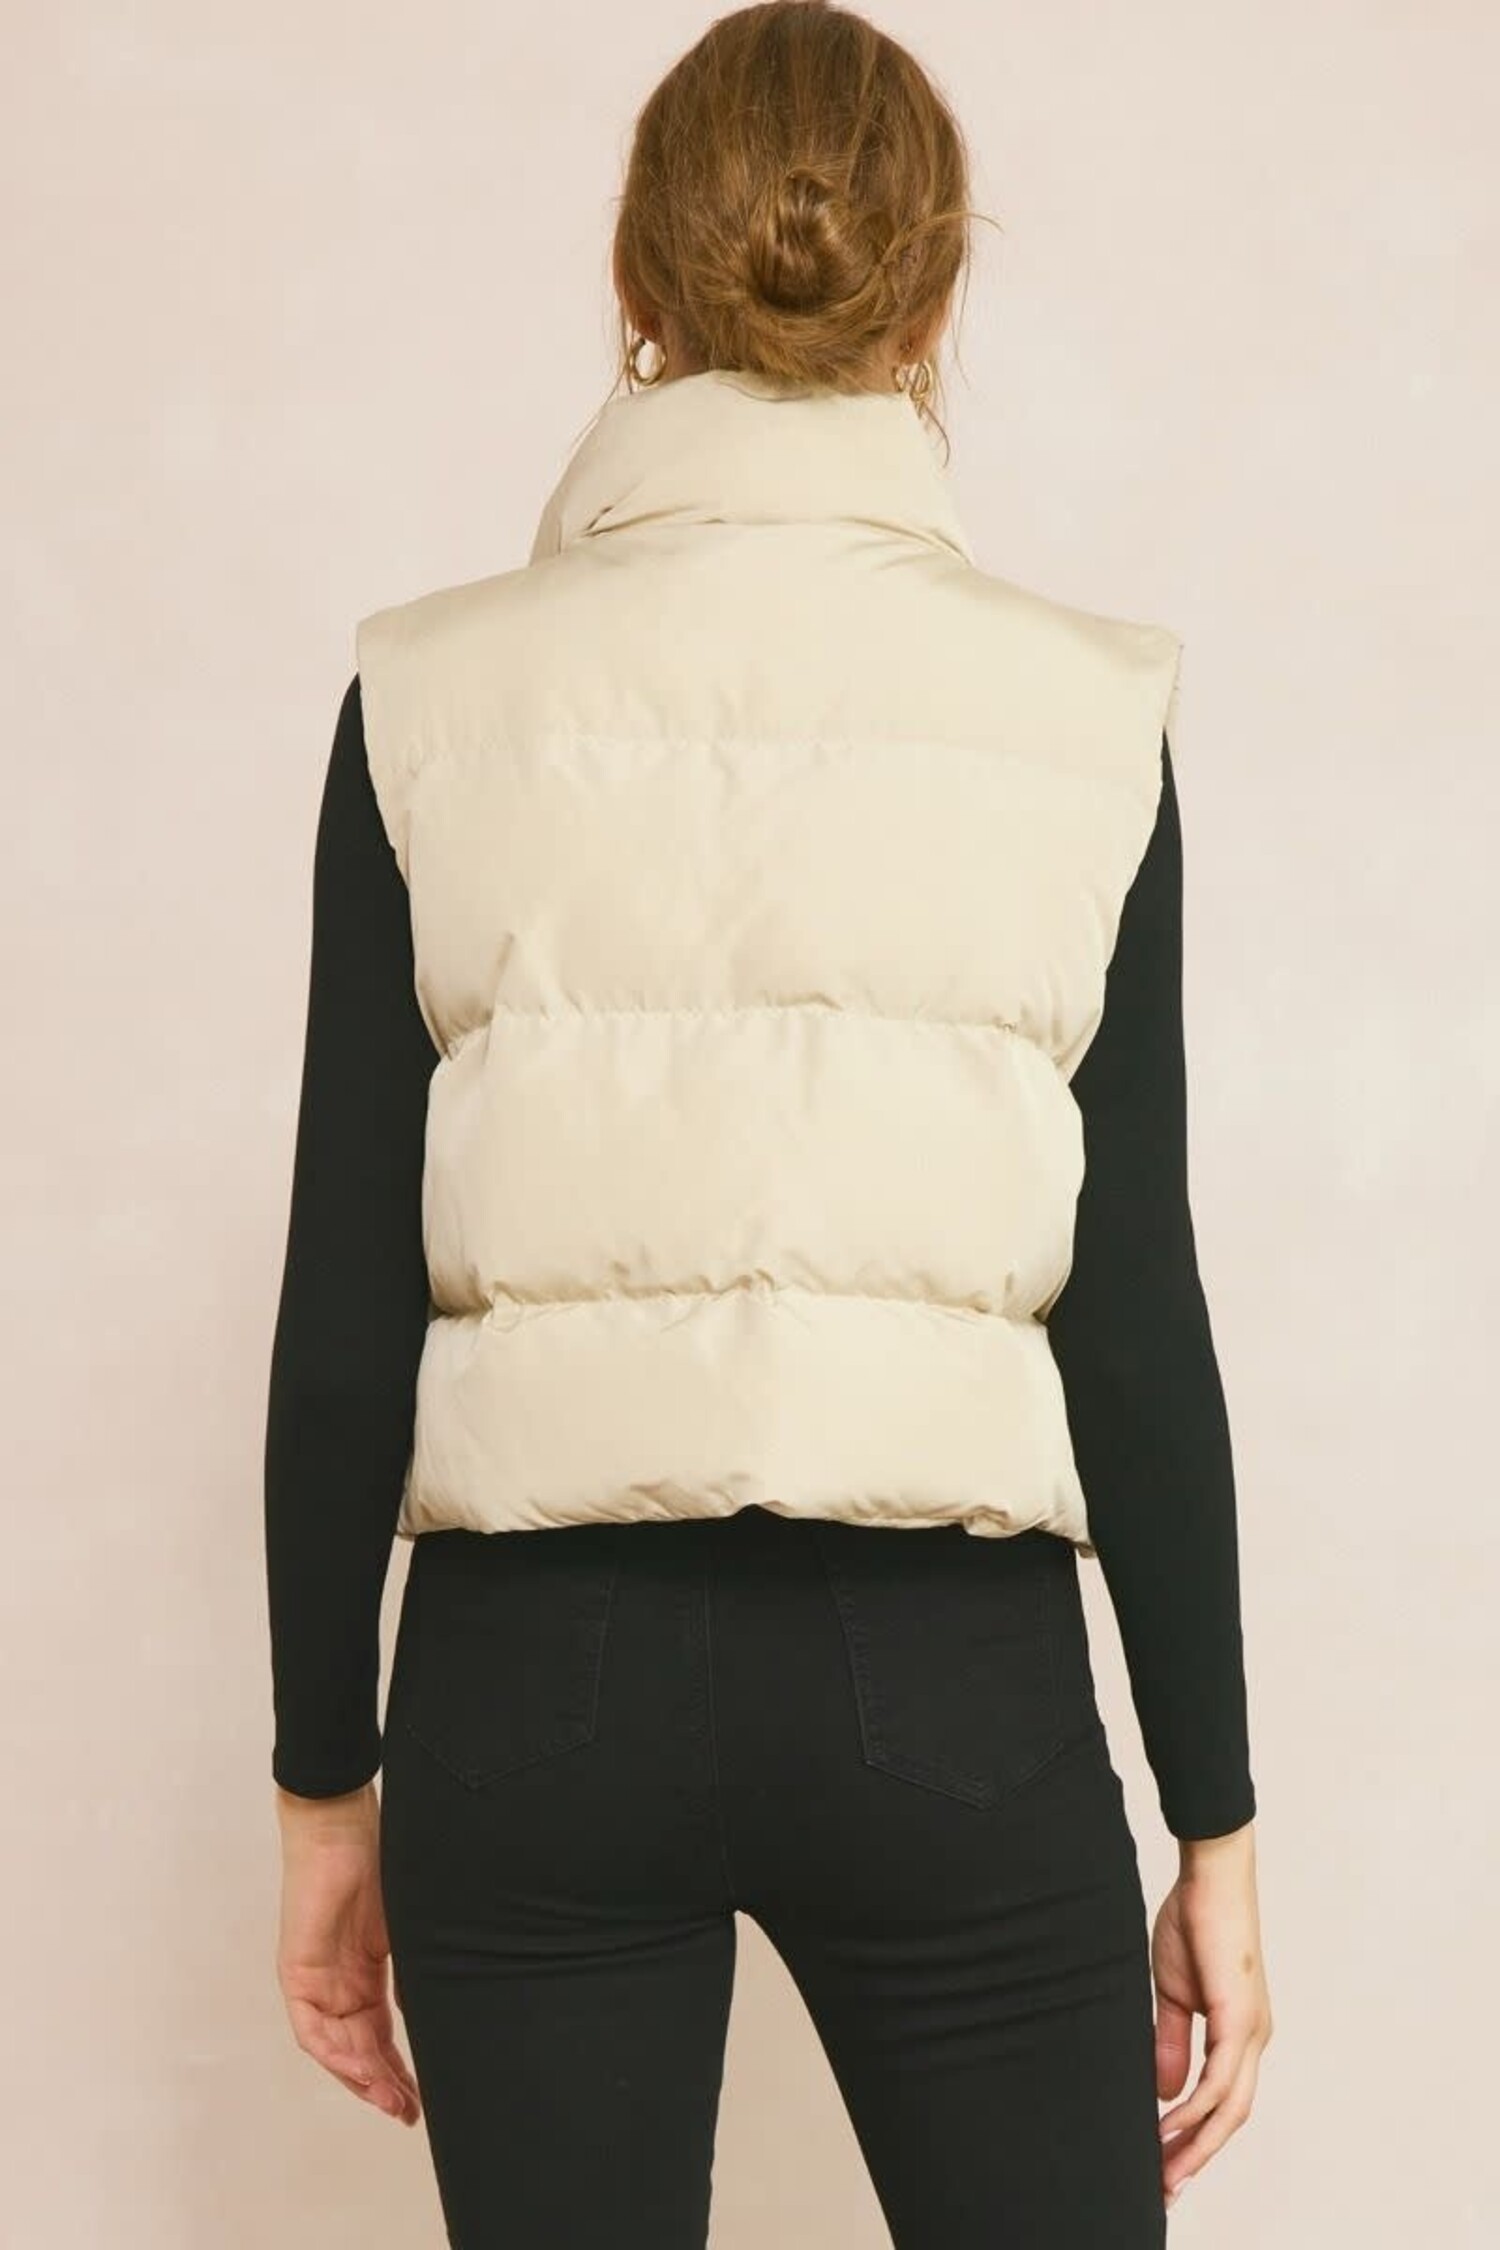 Cropped Puffer Vest - Chocolate